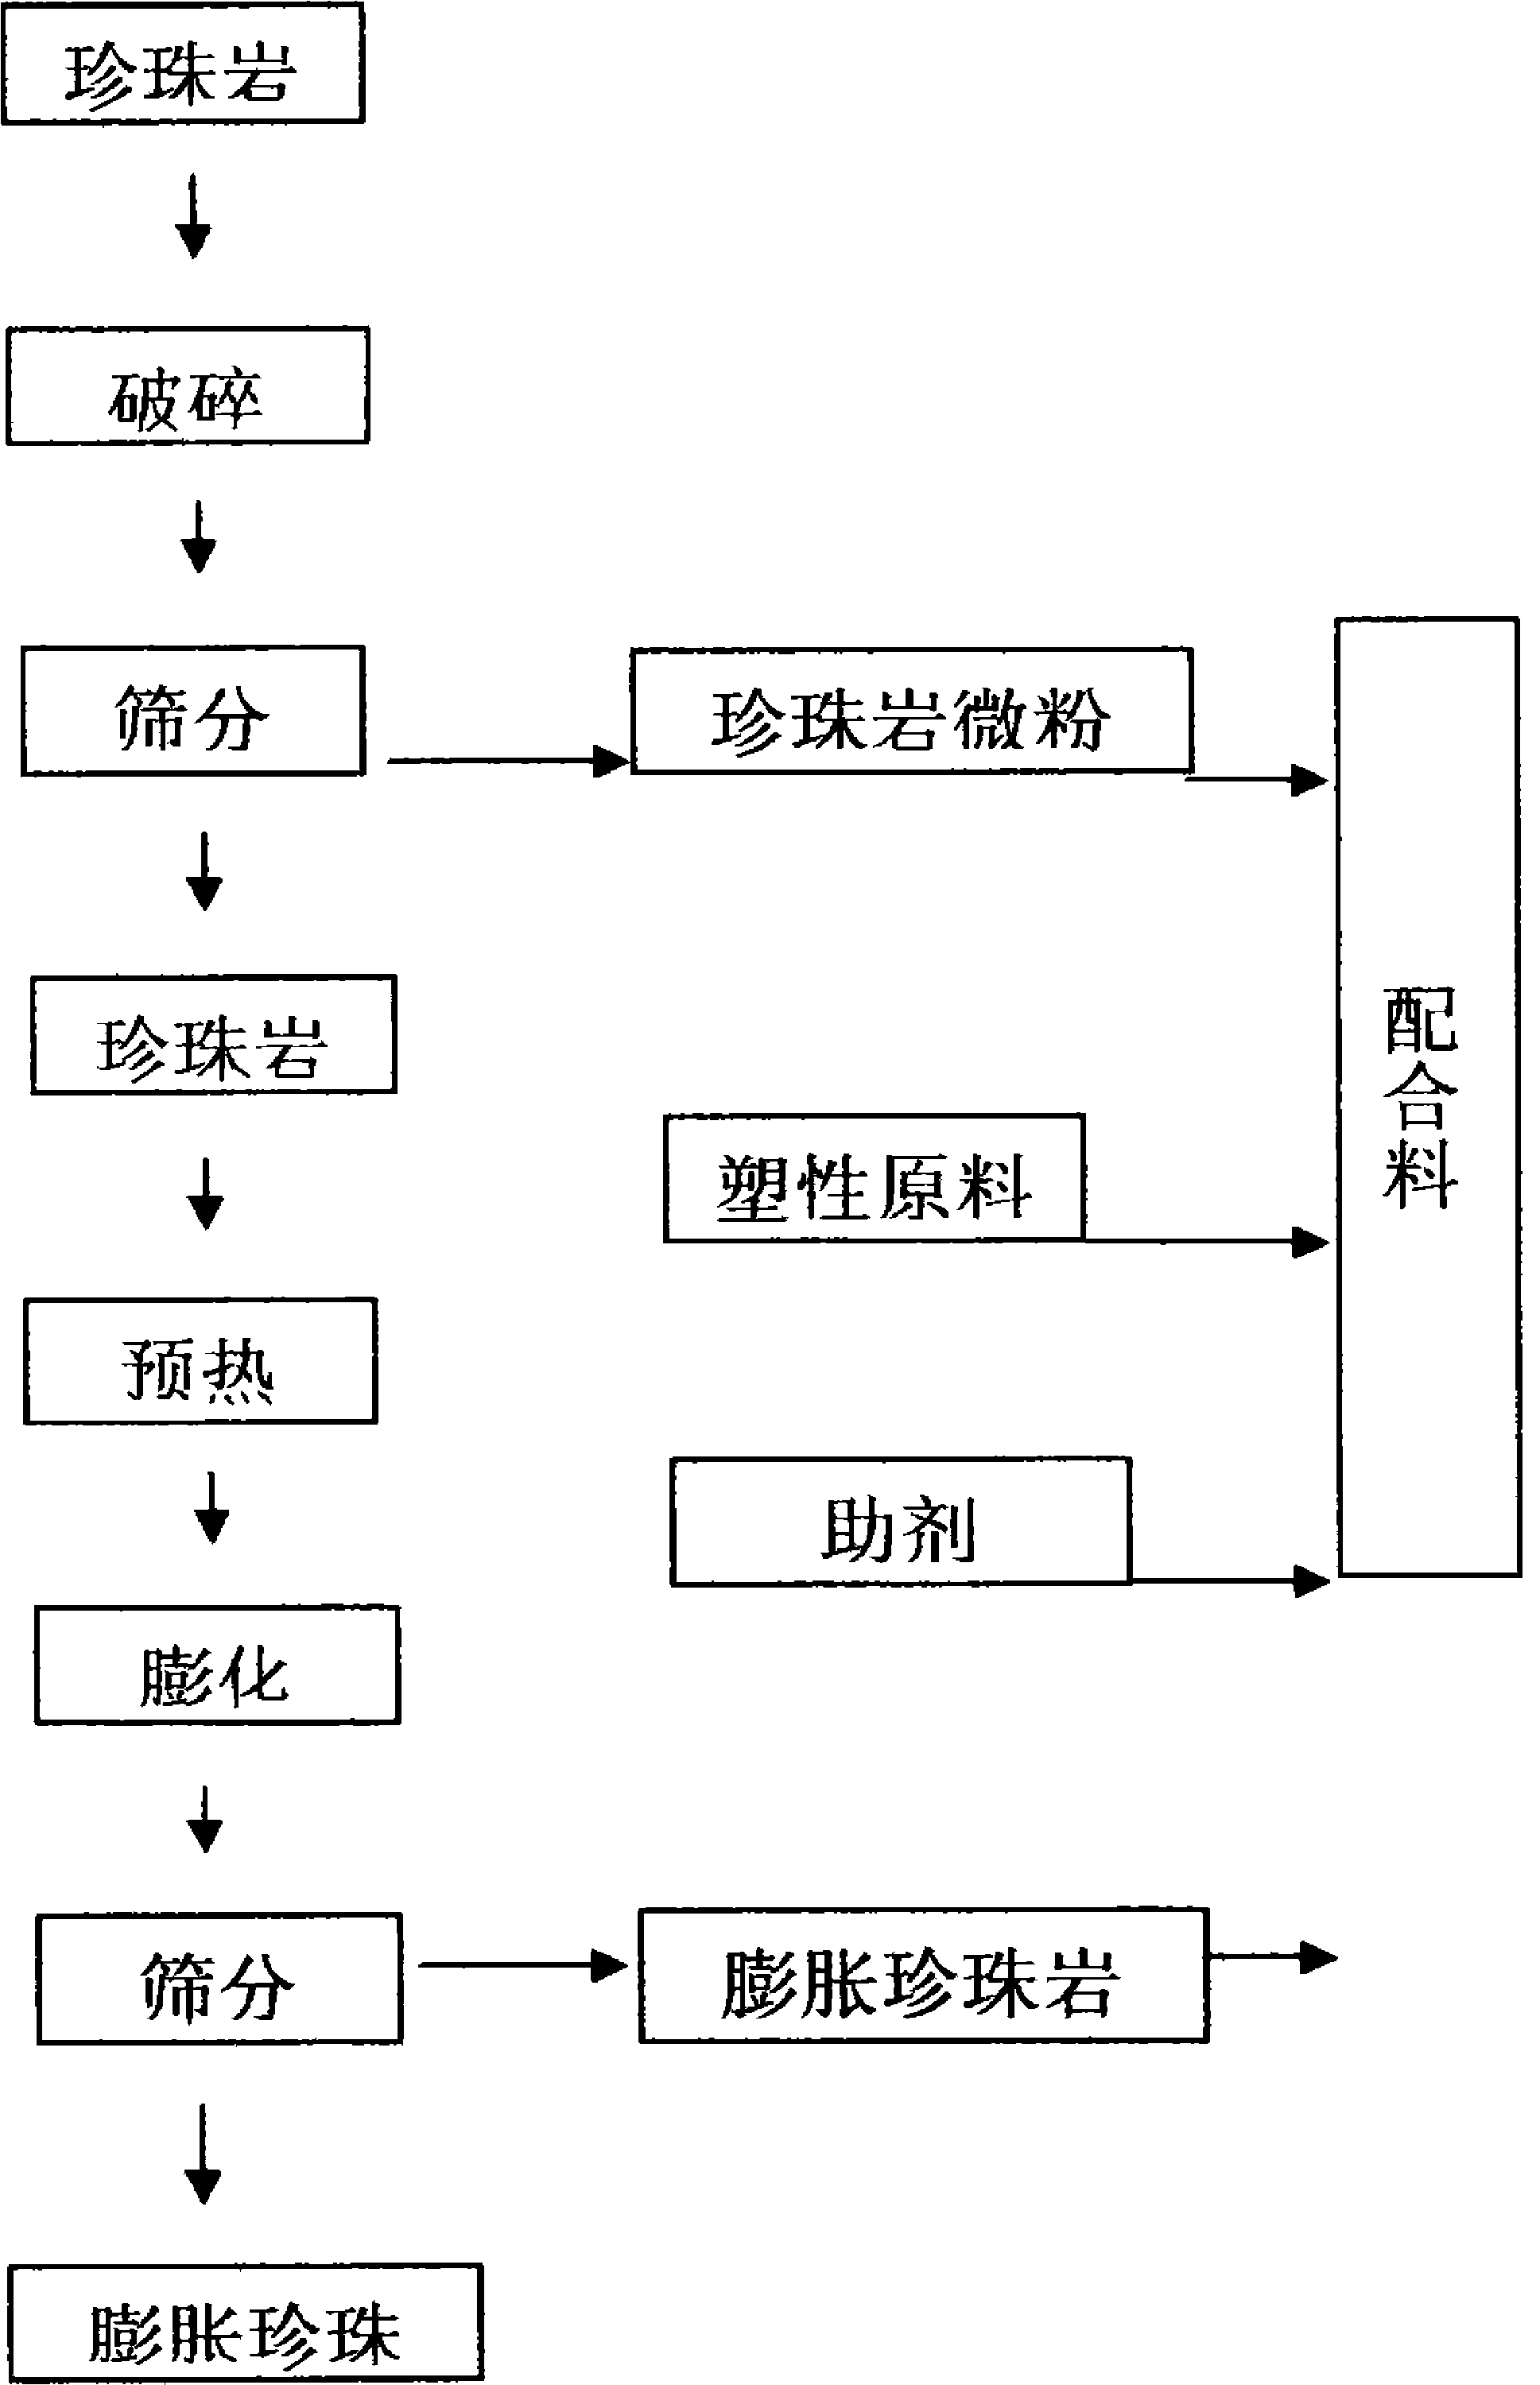 Method for producing light-weight heat-insulating decorative ceramic plate by using solid waste in production and processing course of expanded pearlite